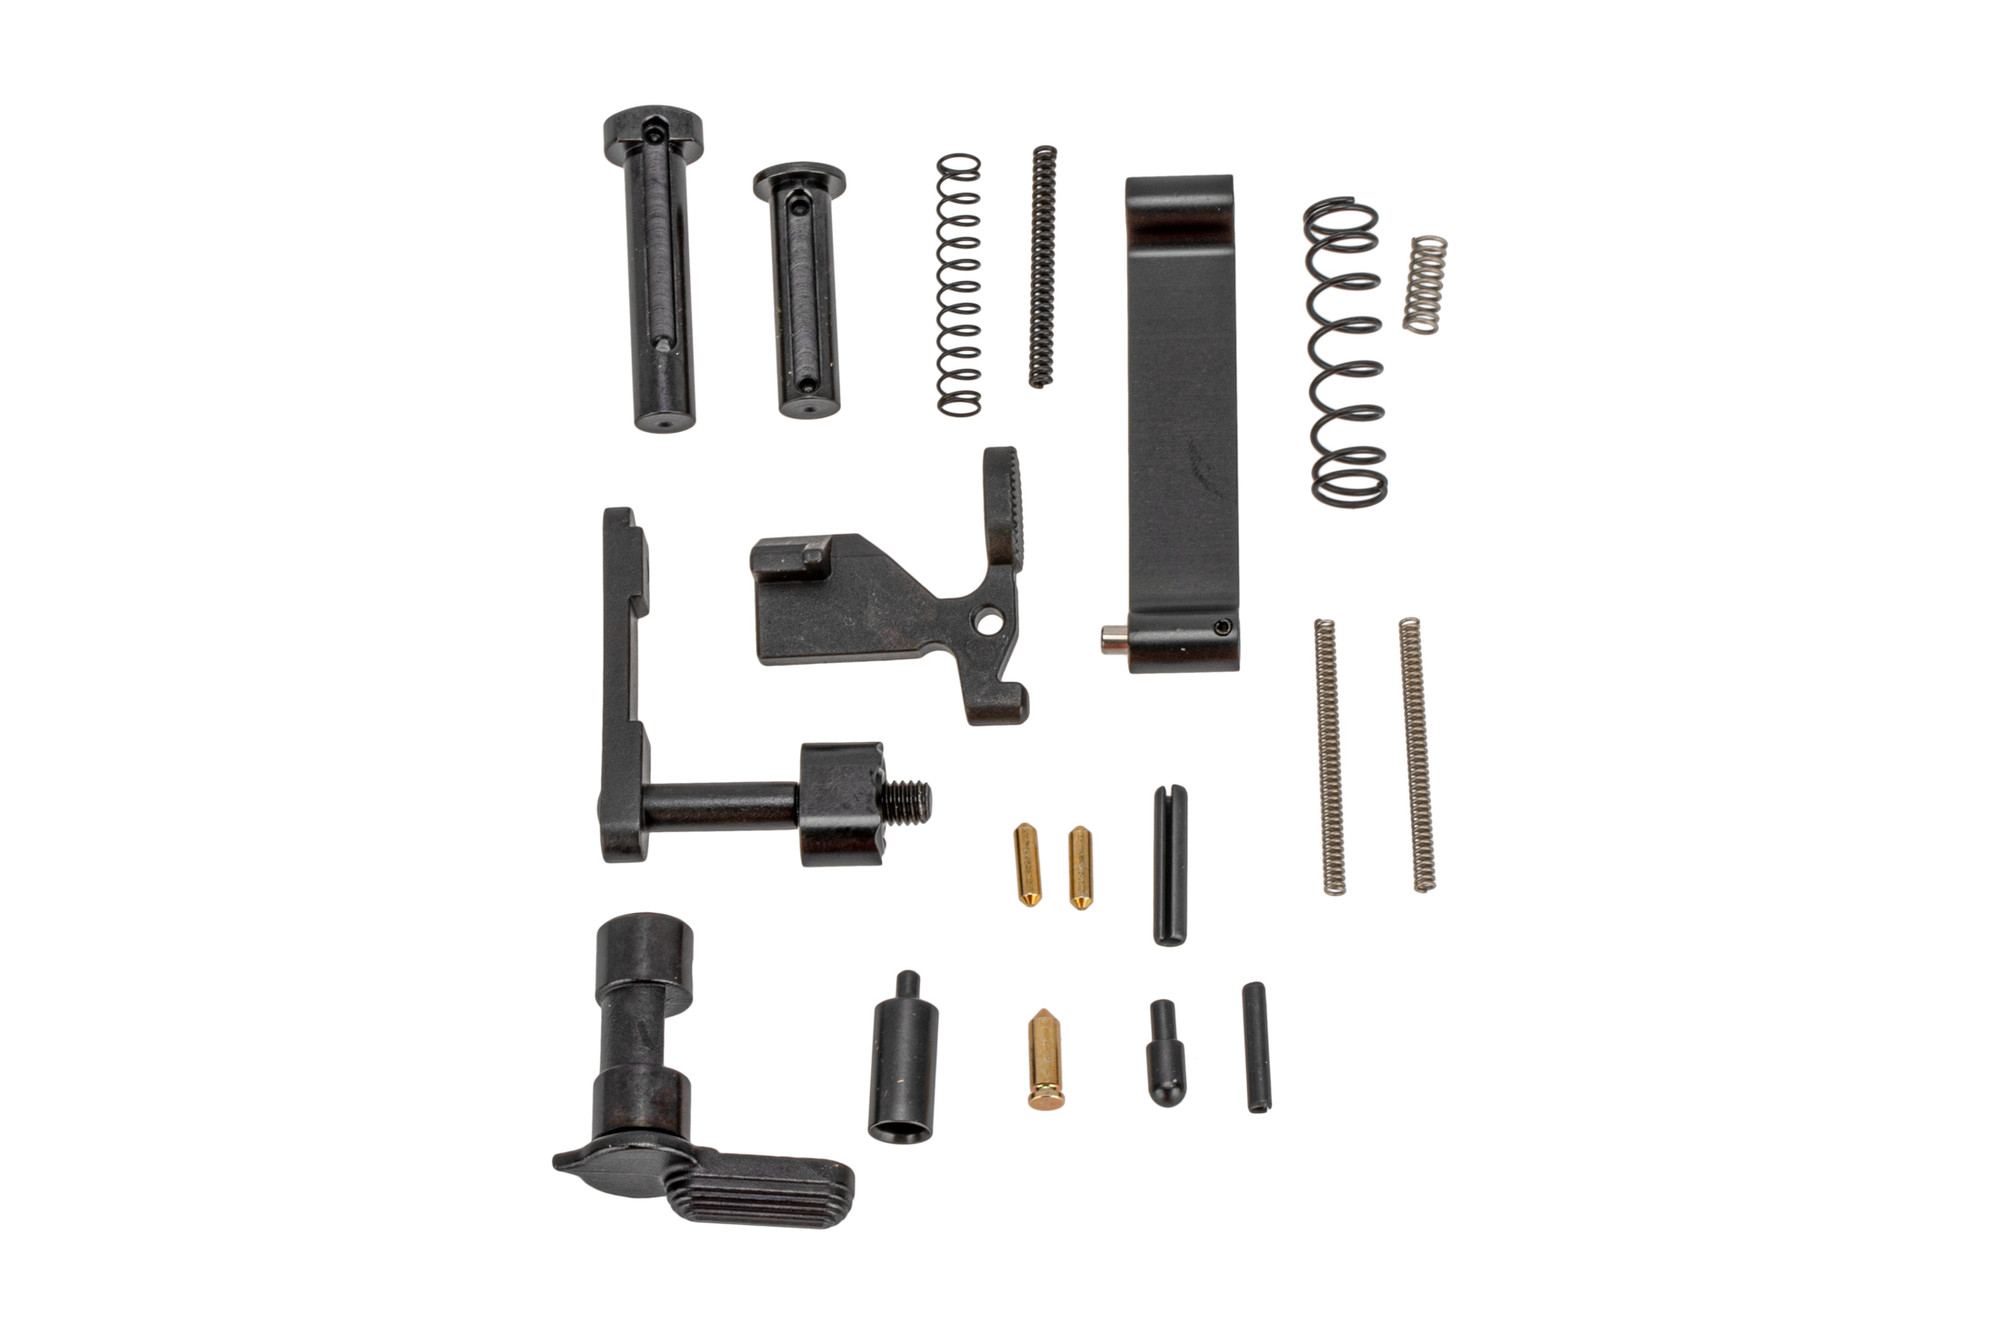 CMC Triggers AR-15 Lower Assembly Kit - No Fire Control Group or Grip - $19.99